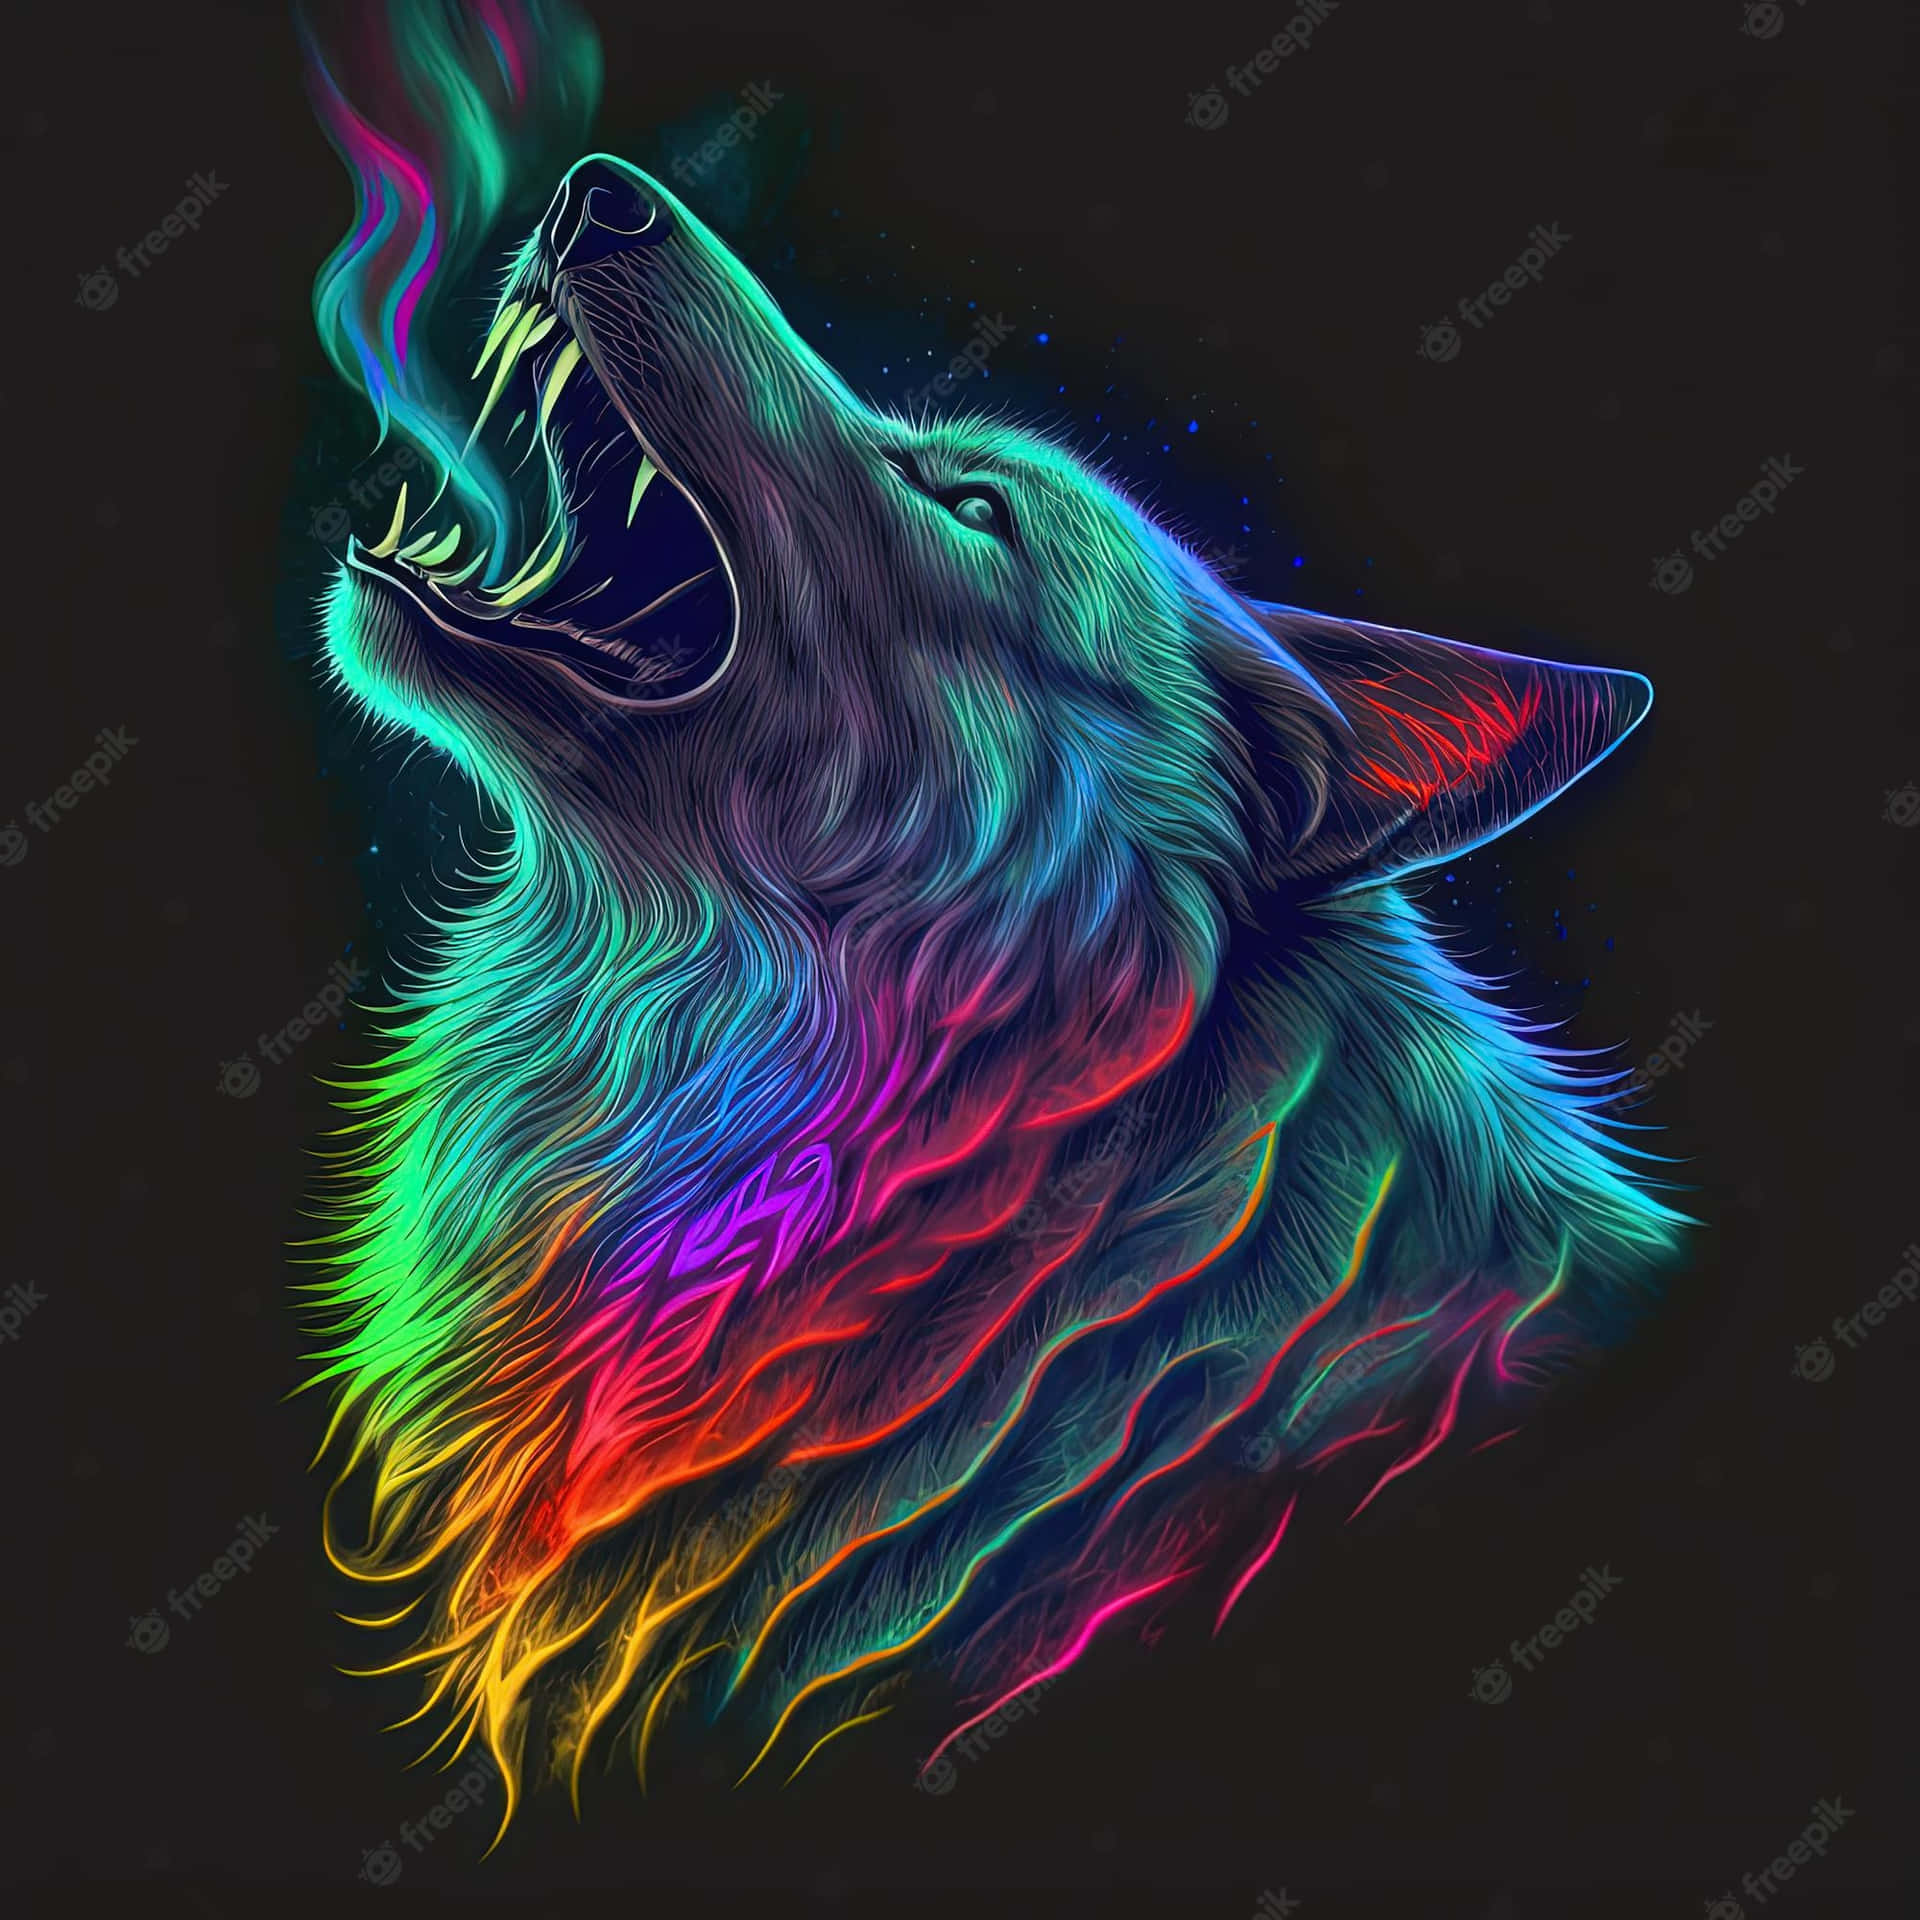 Neon Wolf Wallpapers - Wallpaper Cave